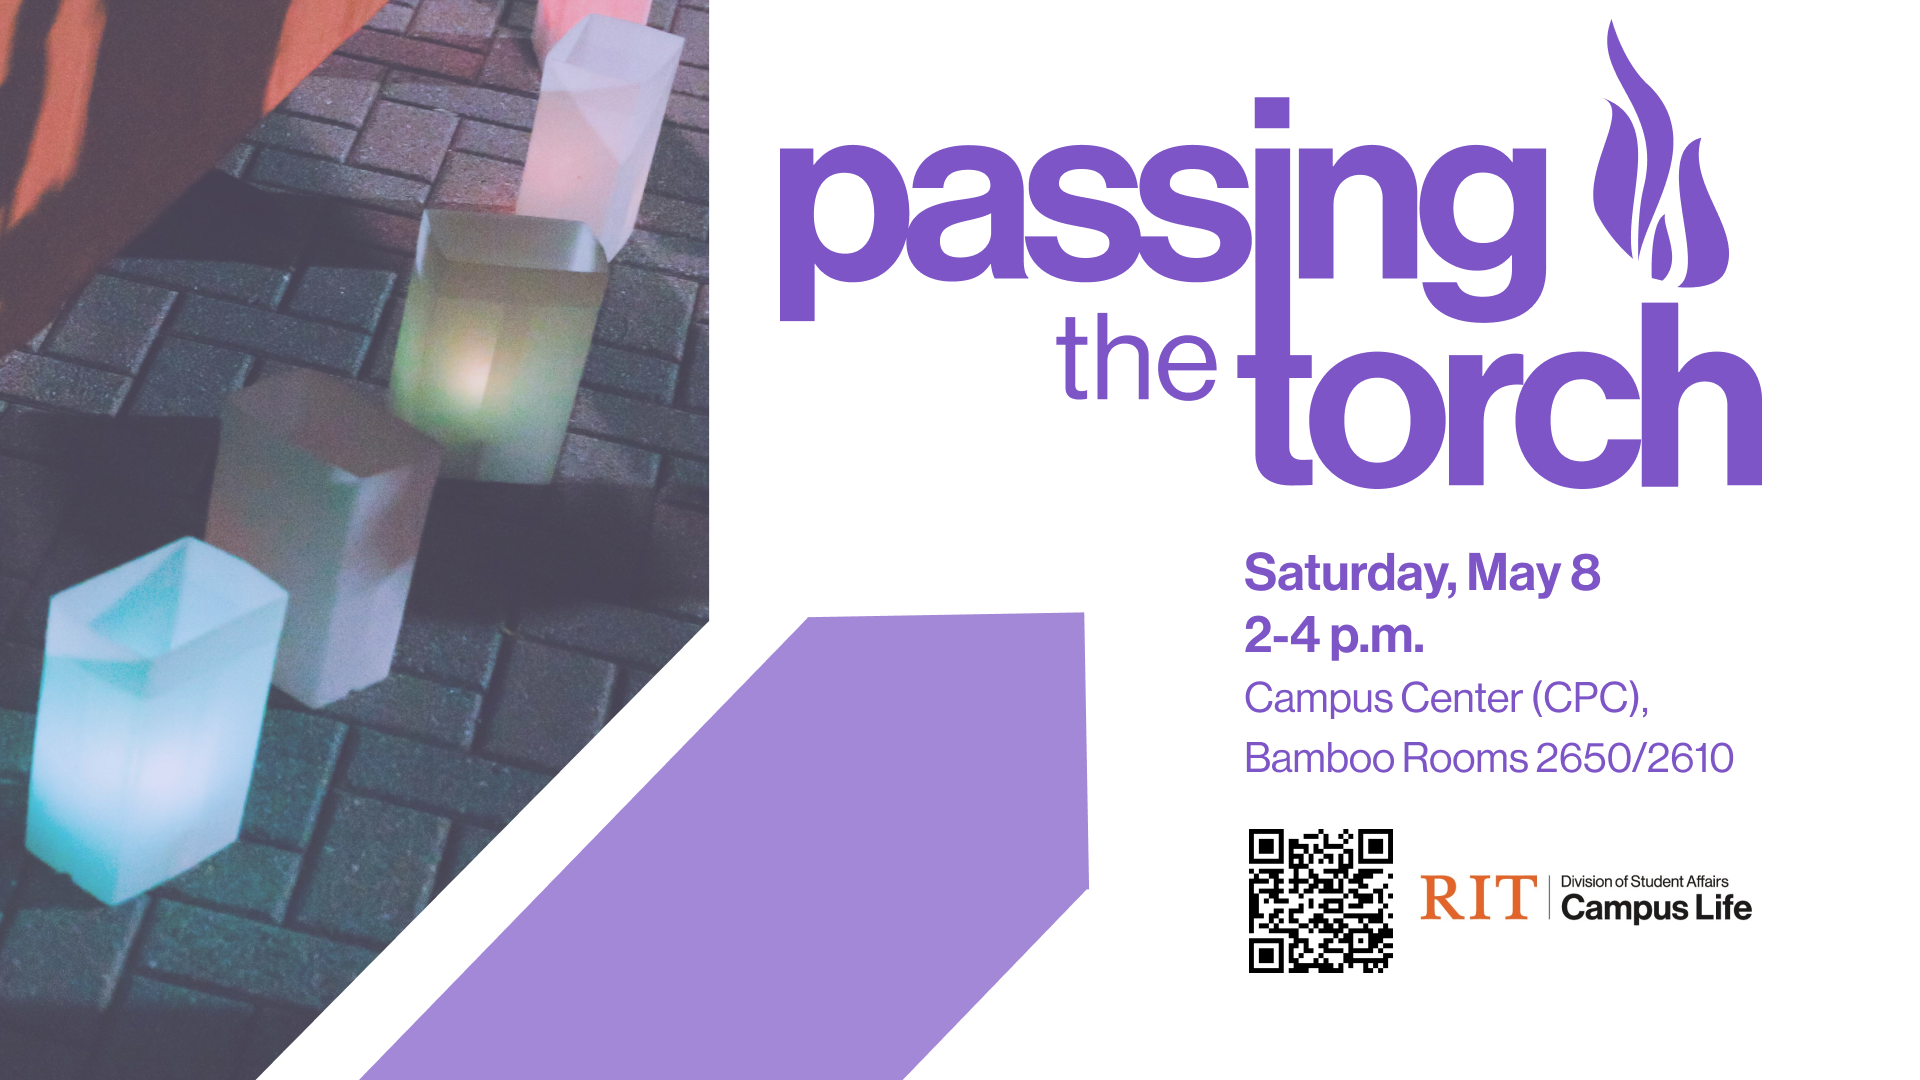 Passing the Torch, Saturday May 8, 2-4 p.m., Campus Center (CPC), Bamboo Rooms 2650/2610